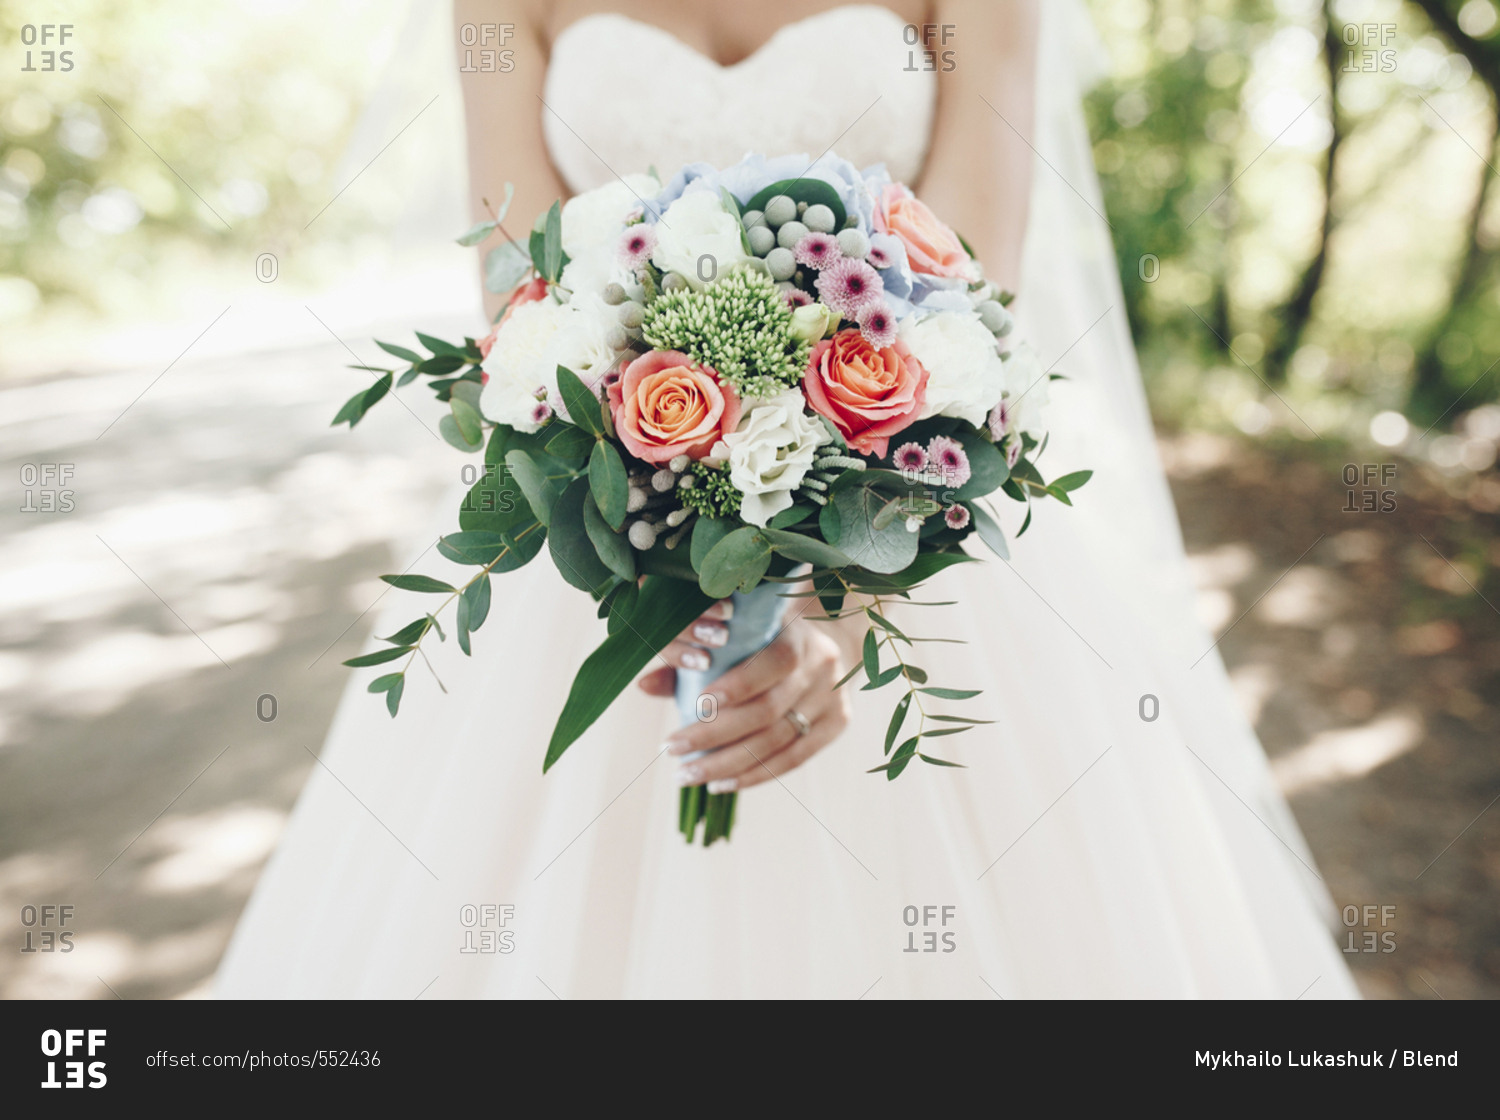 Caucasian bride holding bouquet of flowers outdoors